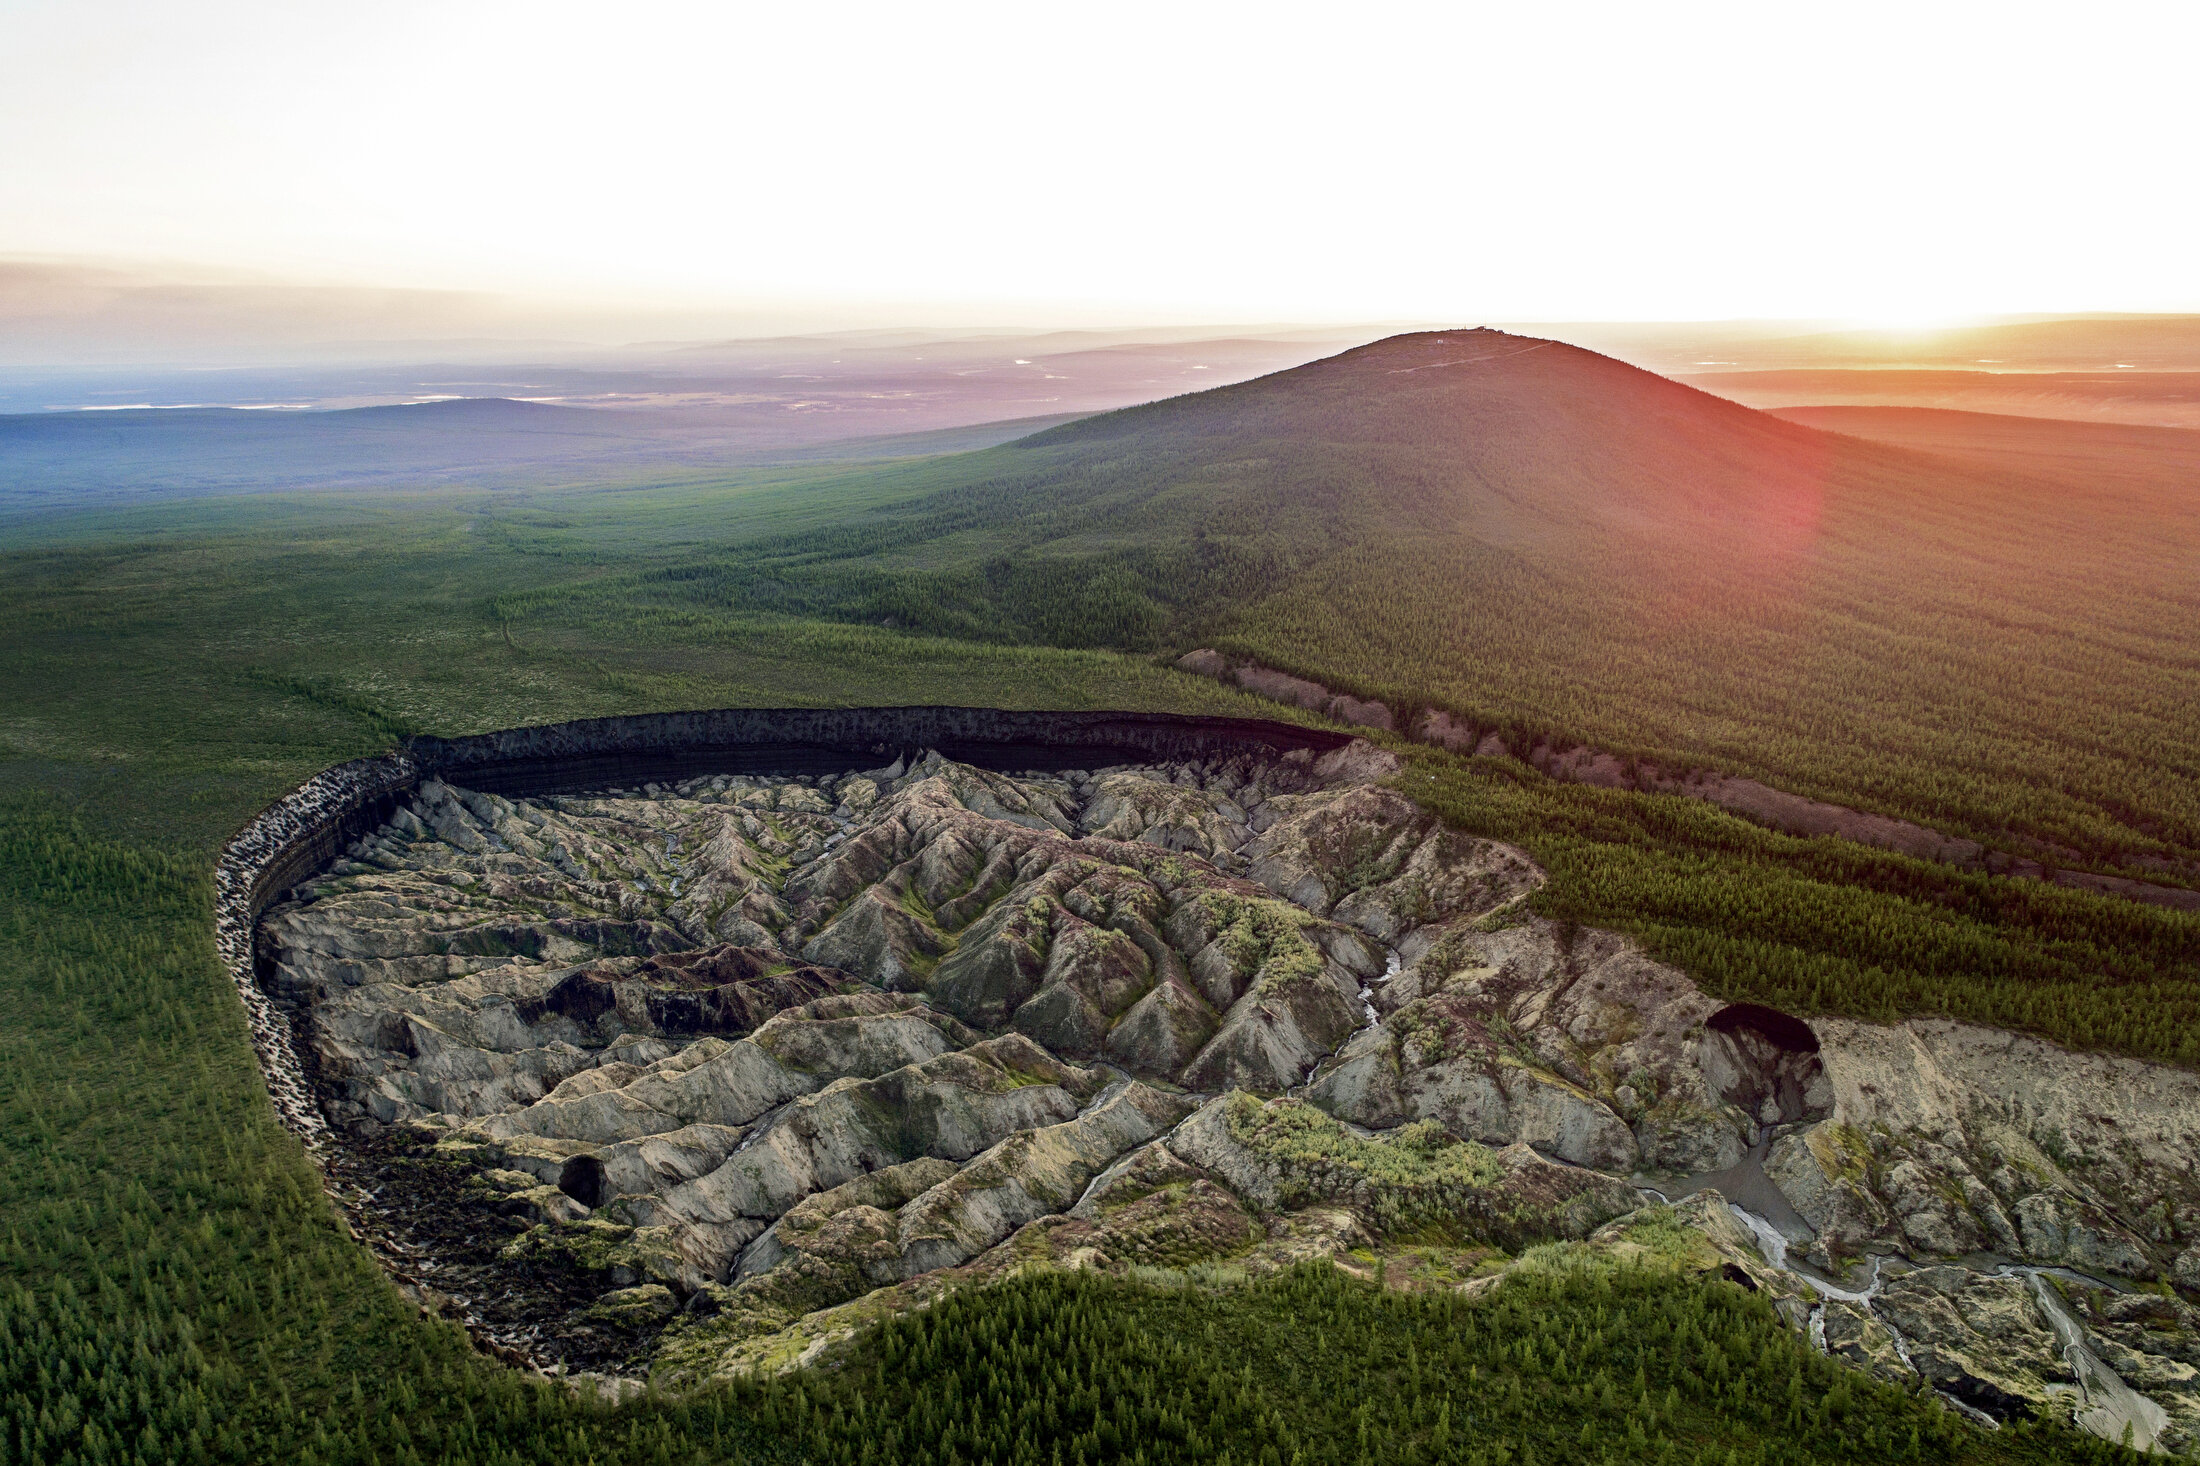  The Batagaika Crater in the Siberian town of Batagay, Russia. It has been called the "hell crater" or the "gateway to the underworld.Ó Over 300 feet deep and 1 kilometer long, this thermokarst depression is one of the biggest in the world, and start